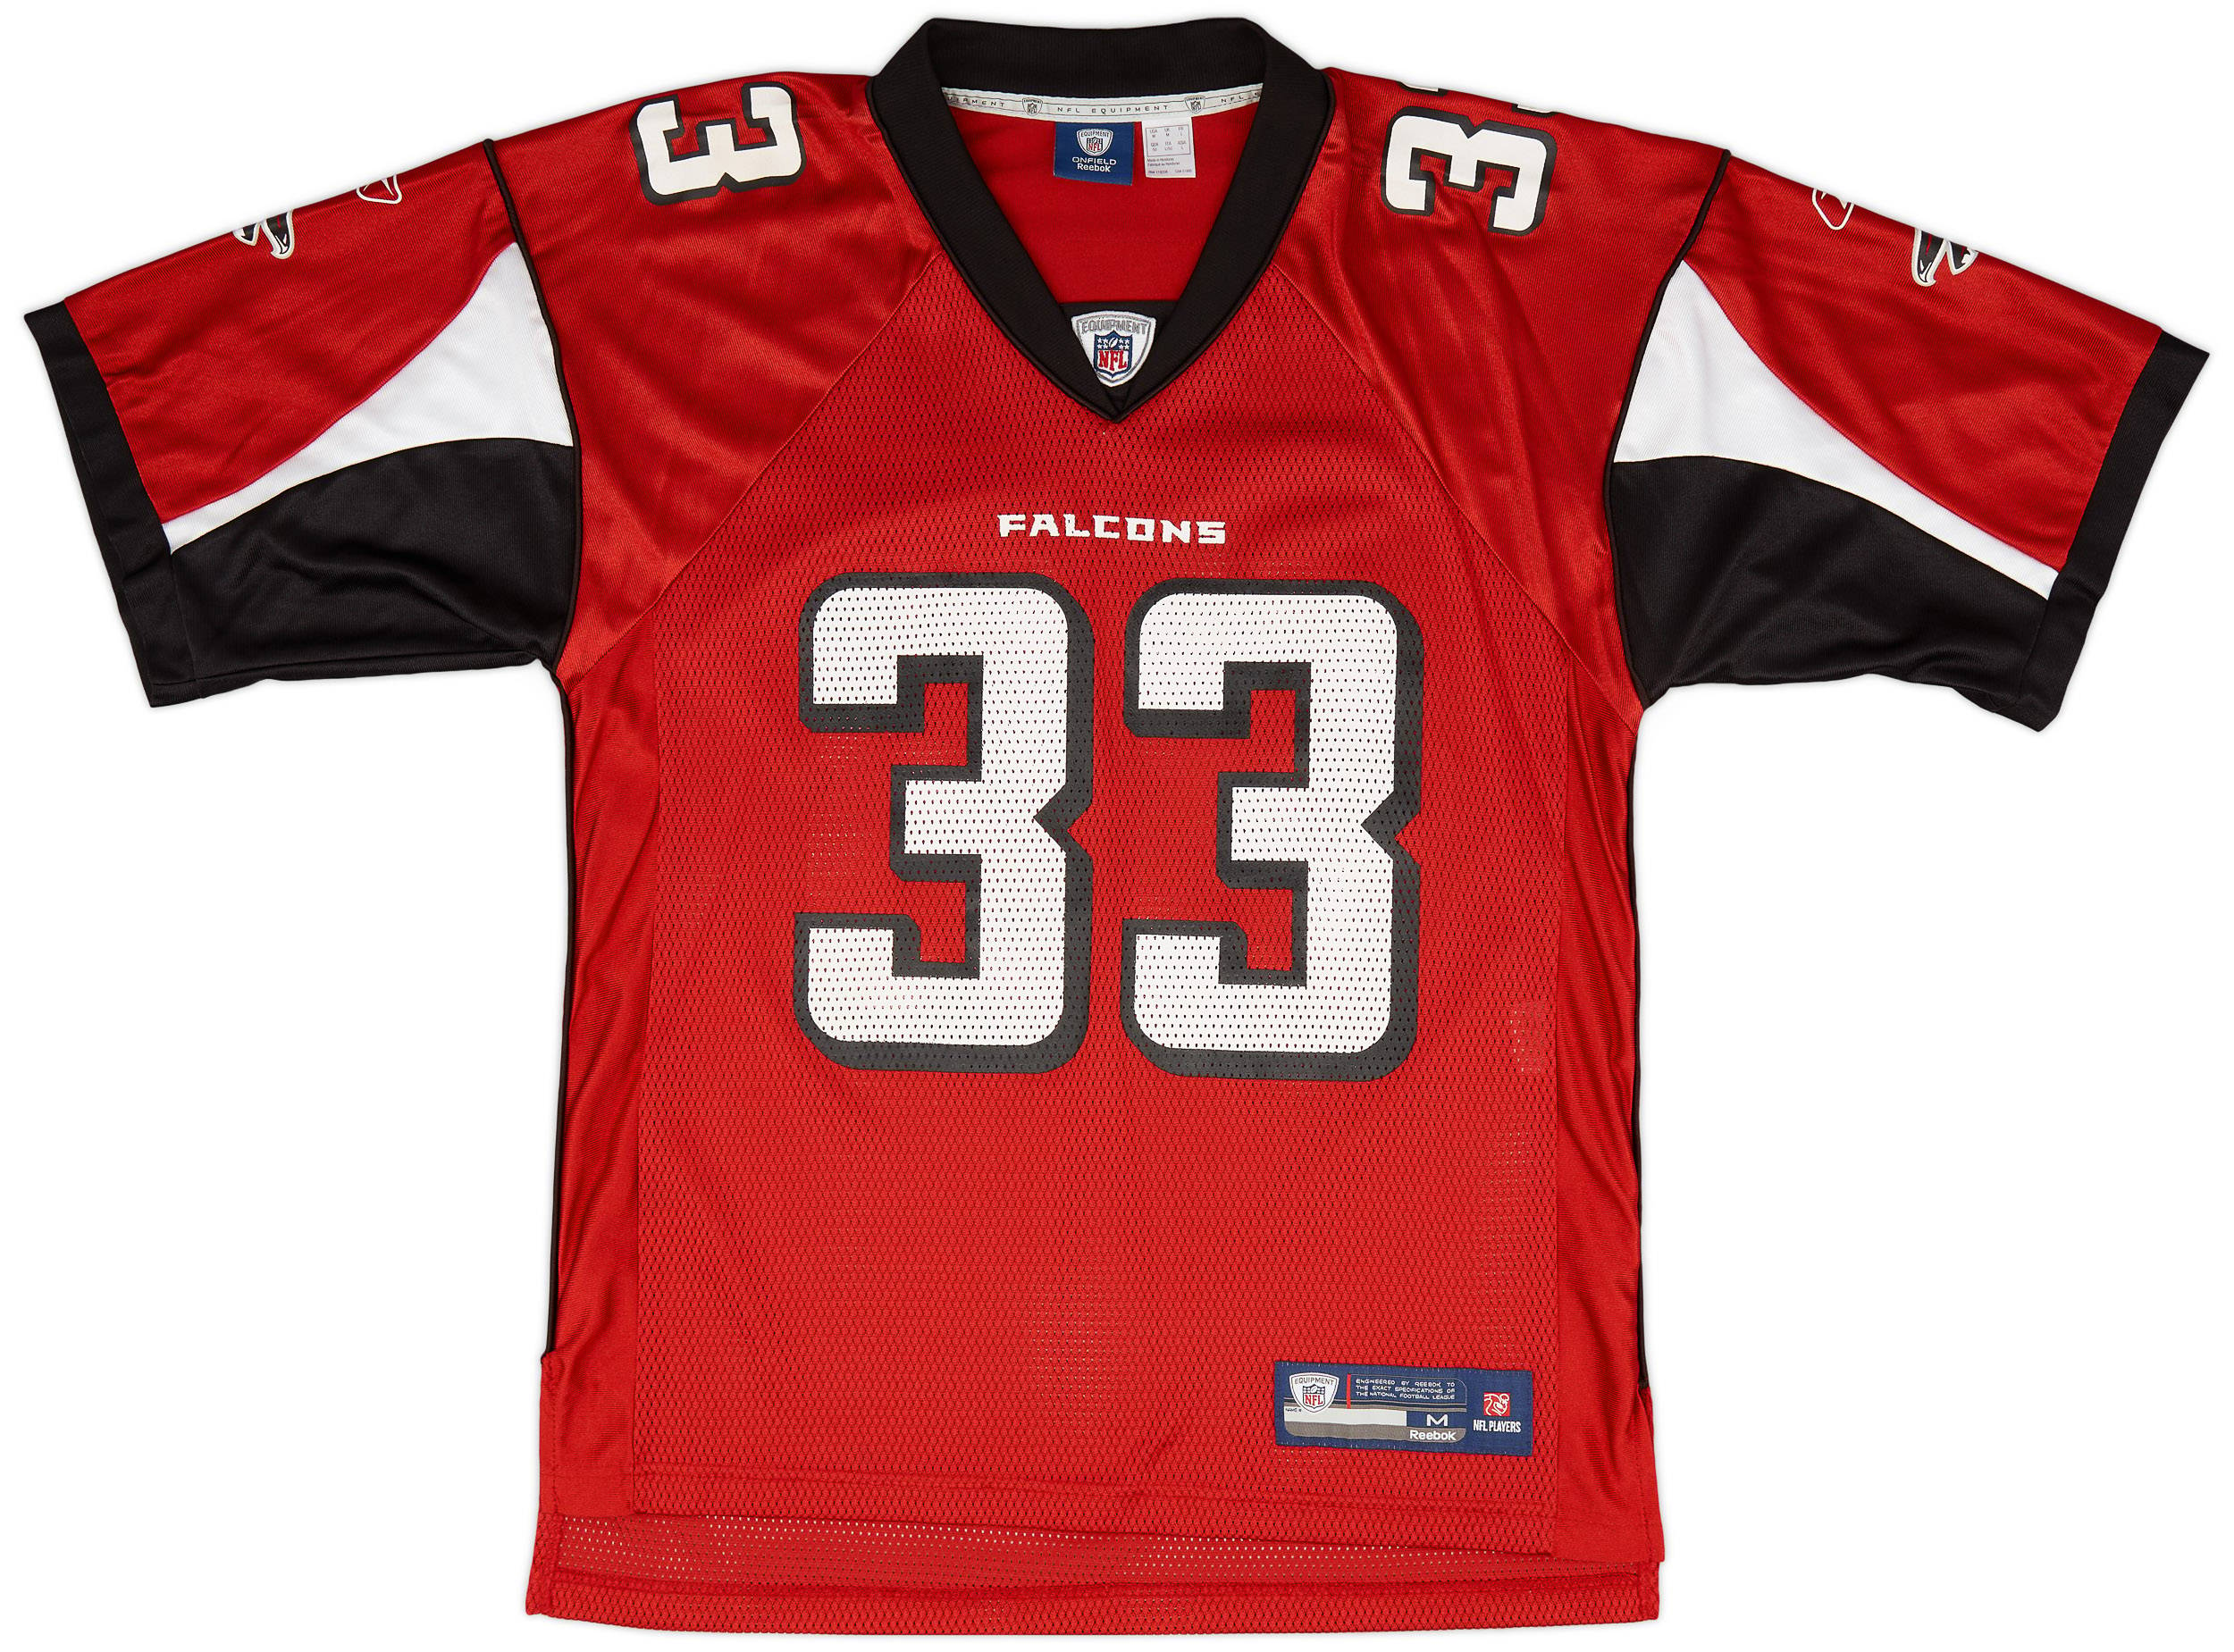 2008-11 Atlanta Falcons Turner #33 Reebok On Field Home Jersey (Excellent) M